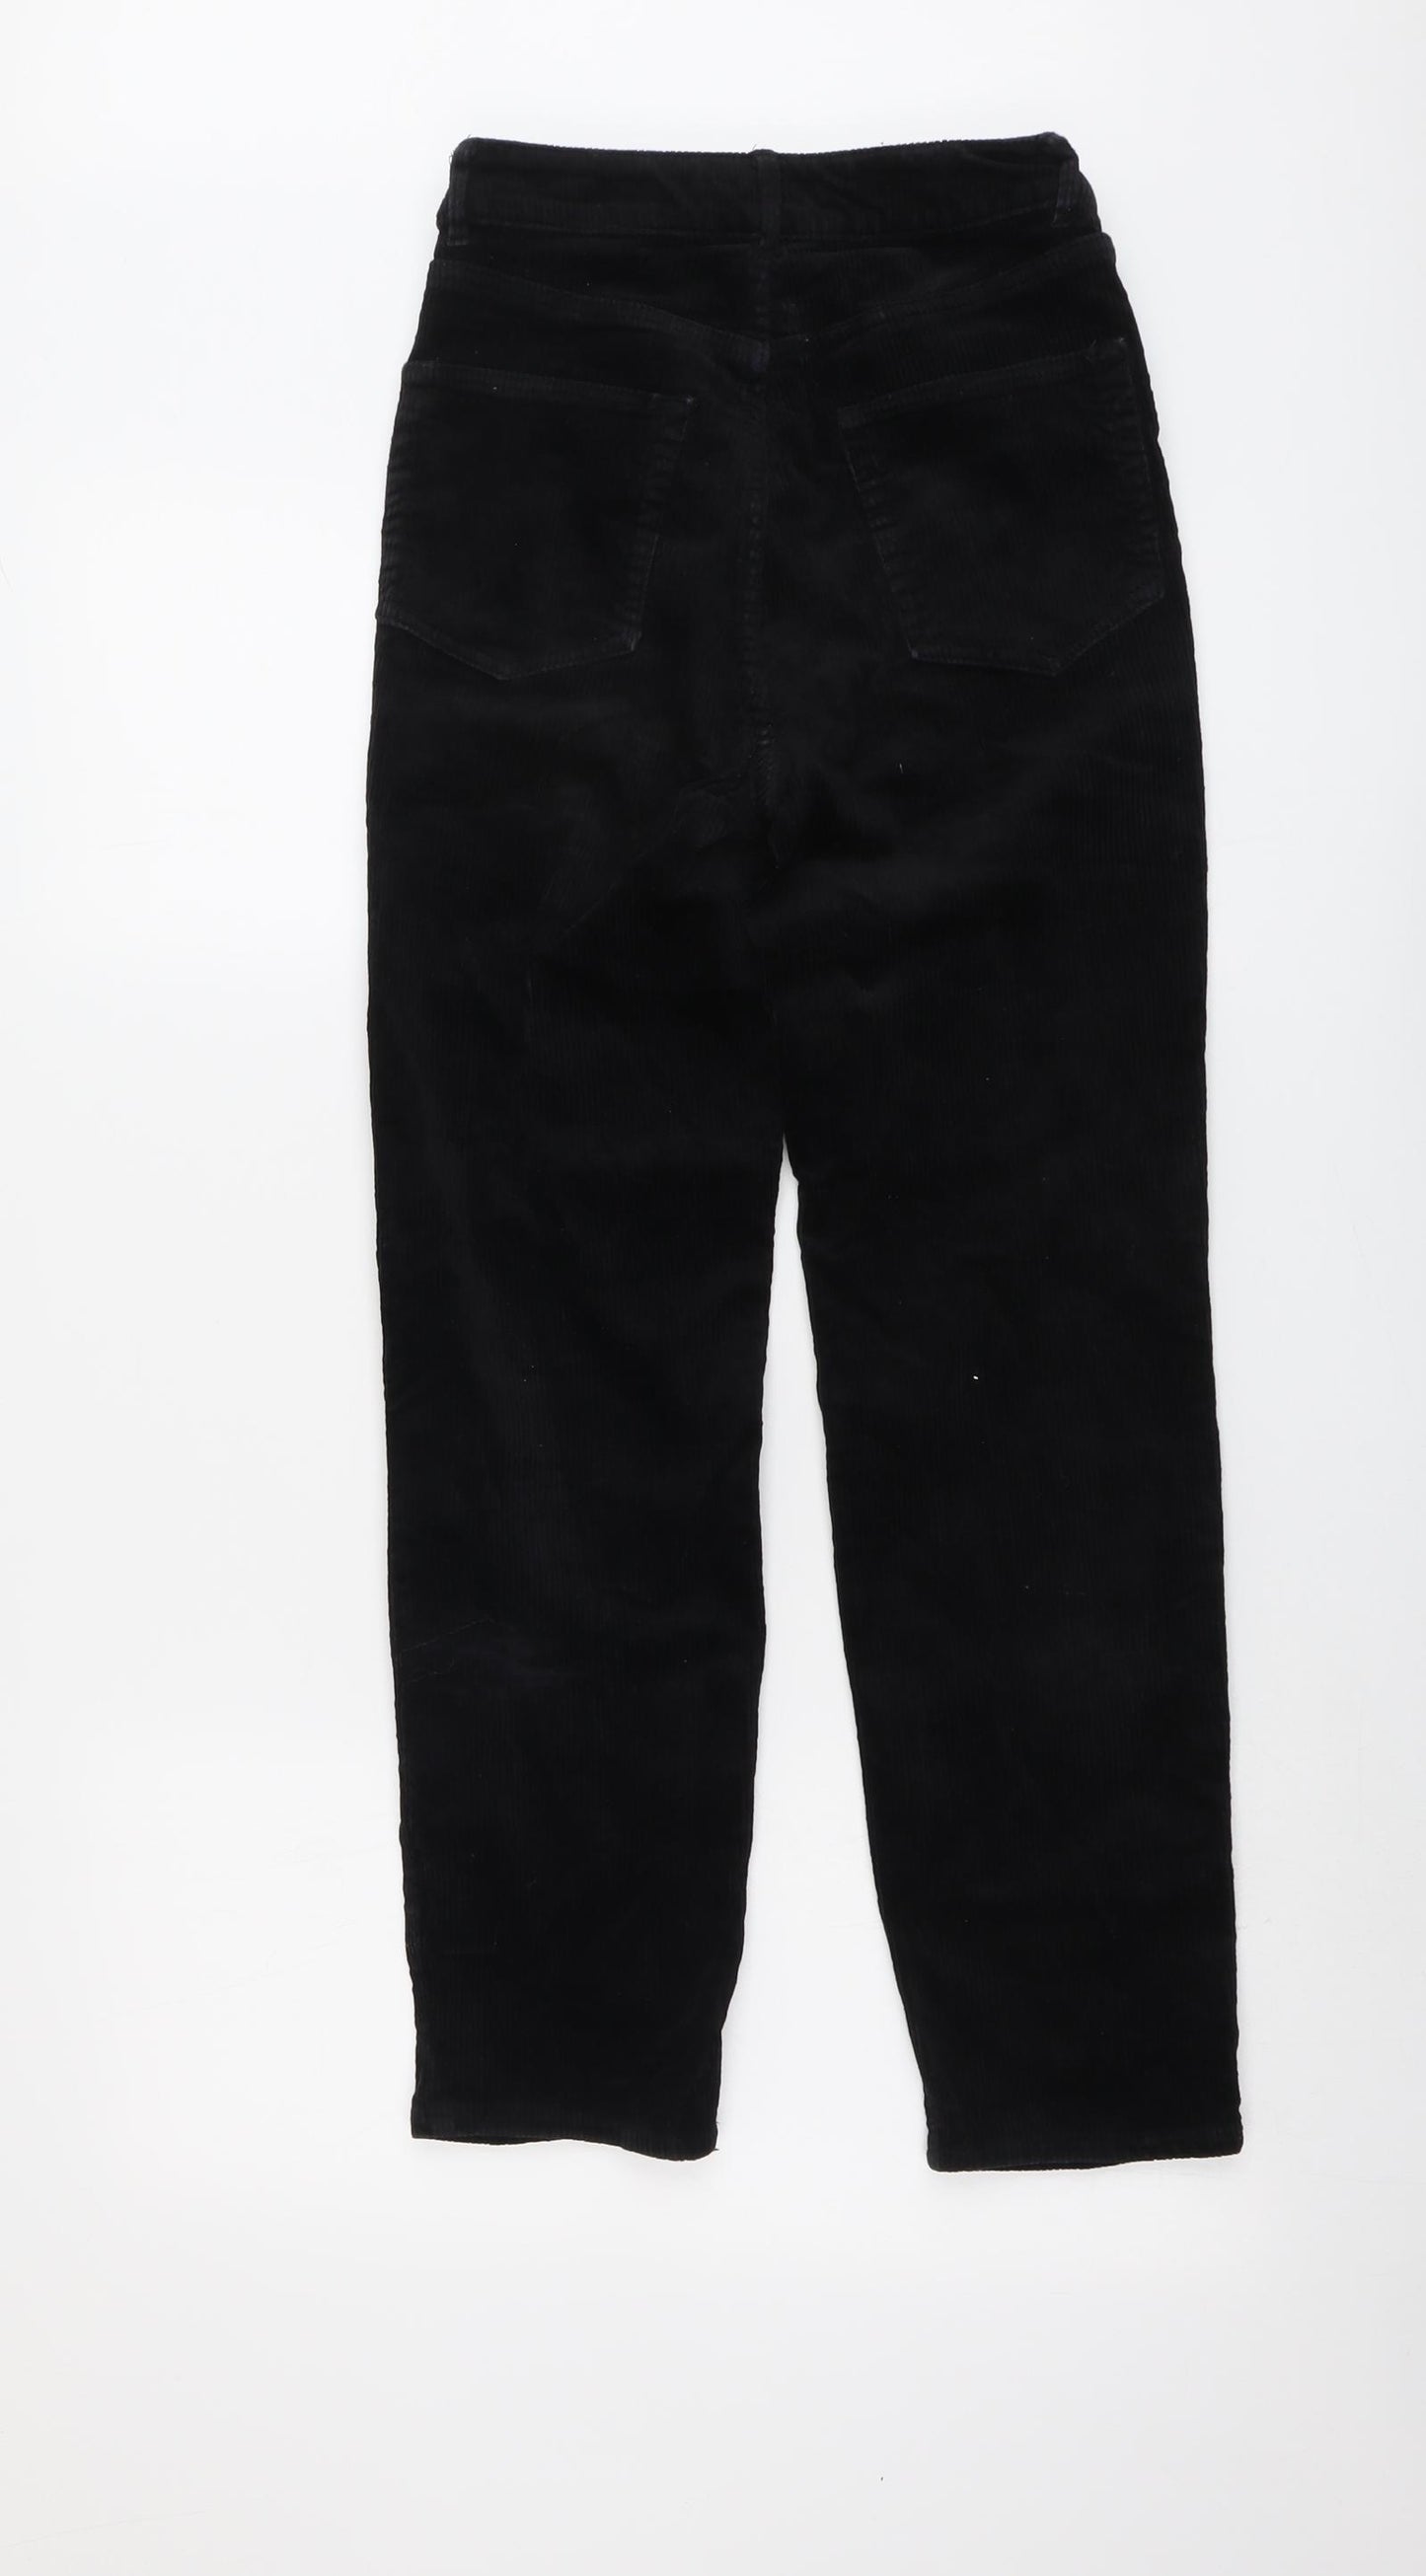 H&M Womens Black Cotton Trousers Size 6 L26 in Regular Button